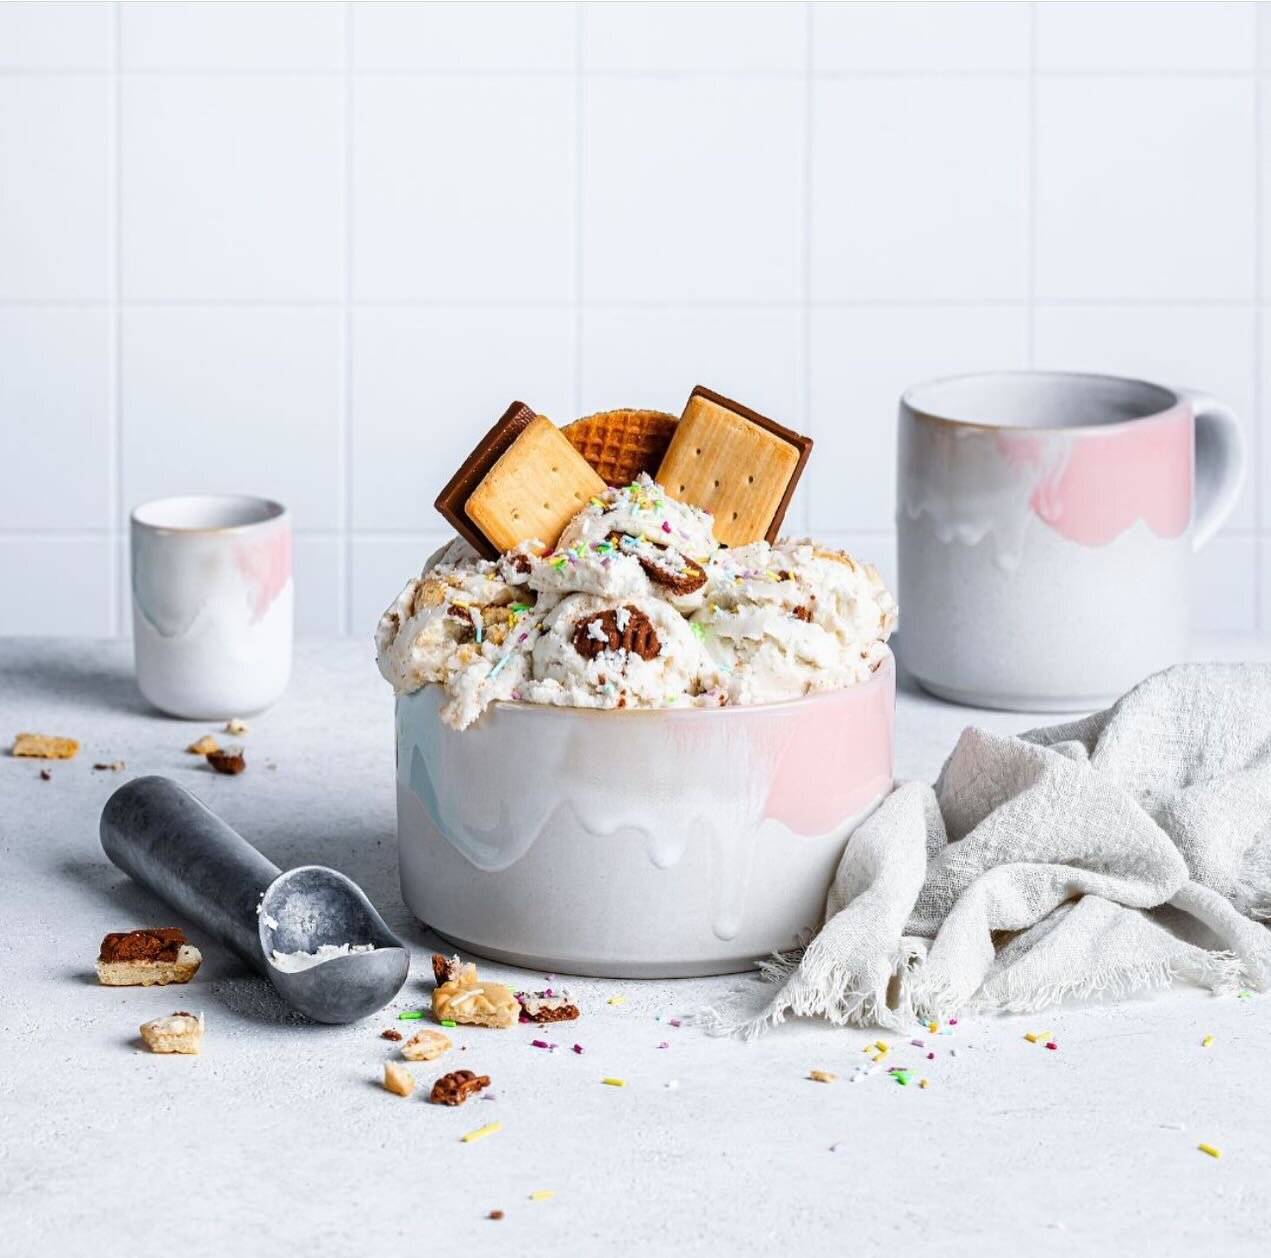 Indulge in nostalgia with our Ice Cream range. These charming Portuguese ceramic pieces capture the essence of childhood, ice cream delights, and carefree moments. They embody the beauty, delicacy, and pure joy that come with every sip

Each piece in